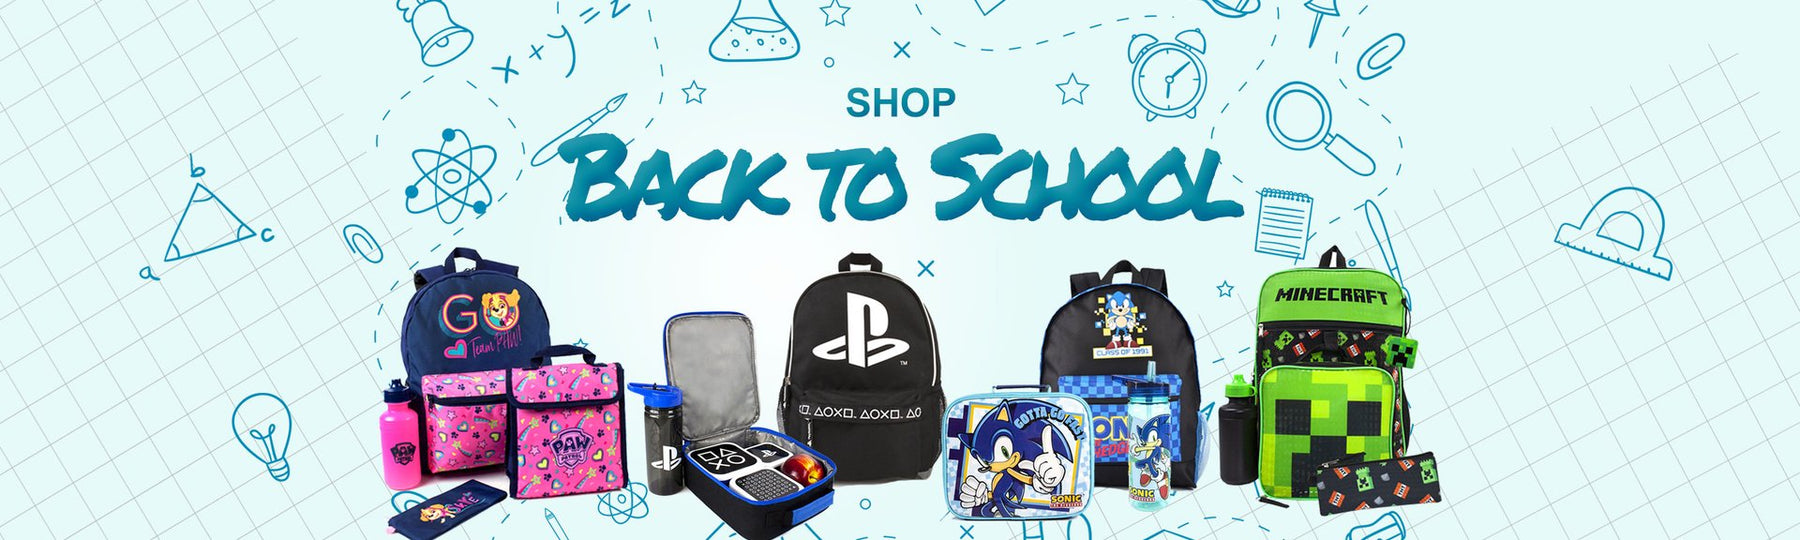 Our favourite Back to School products!